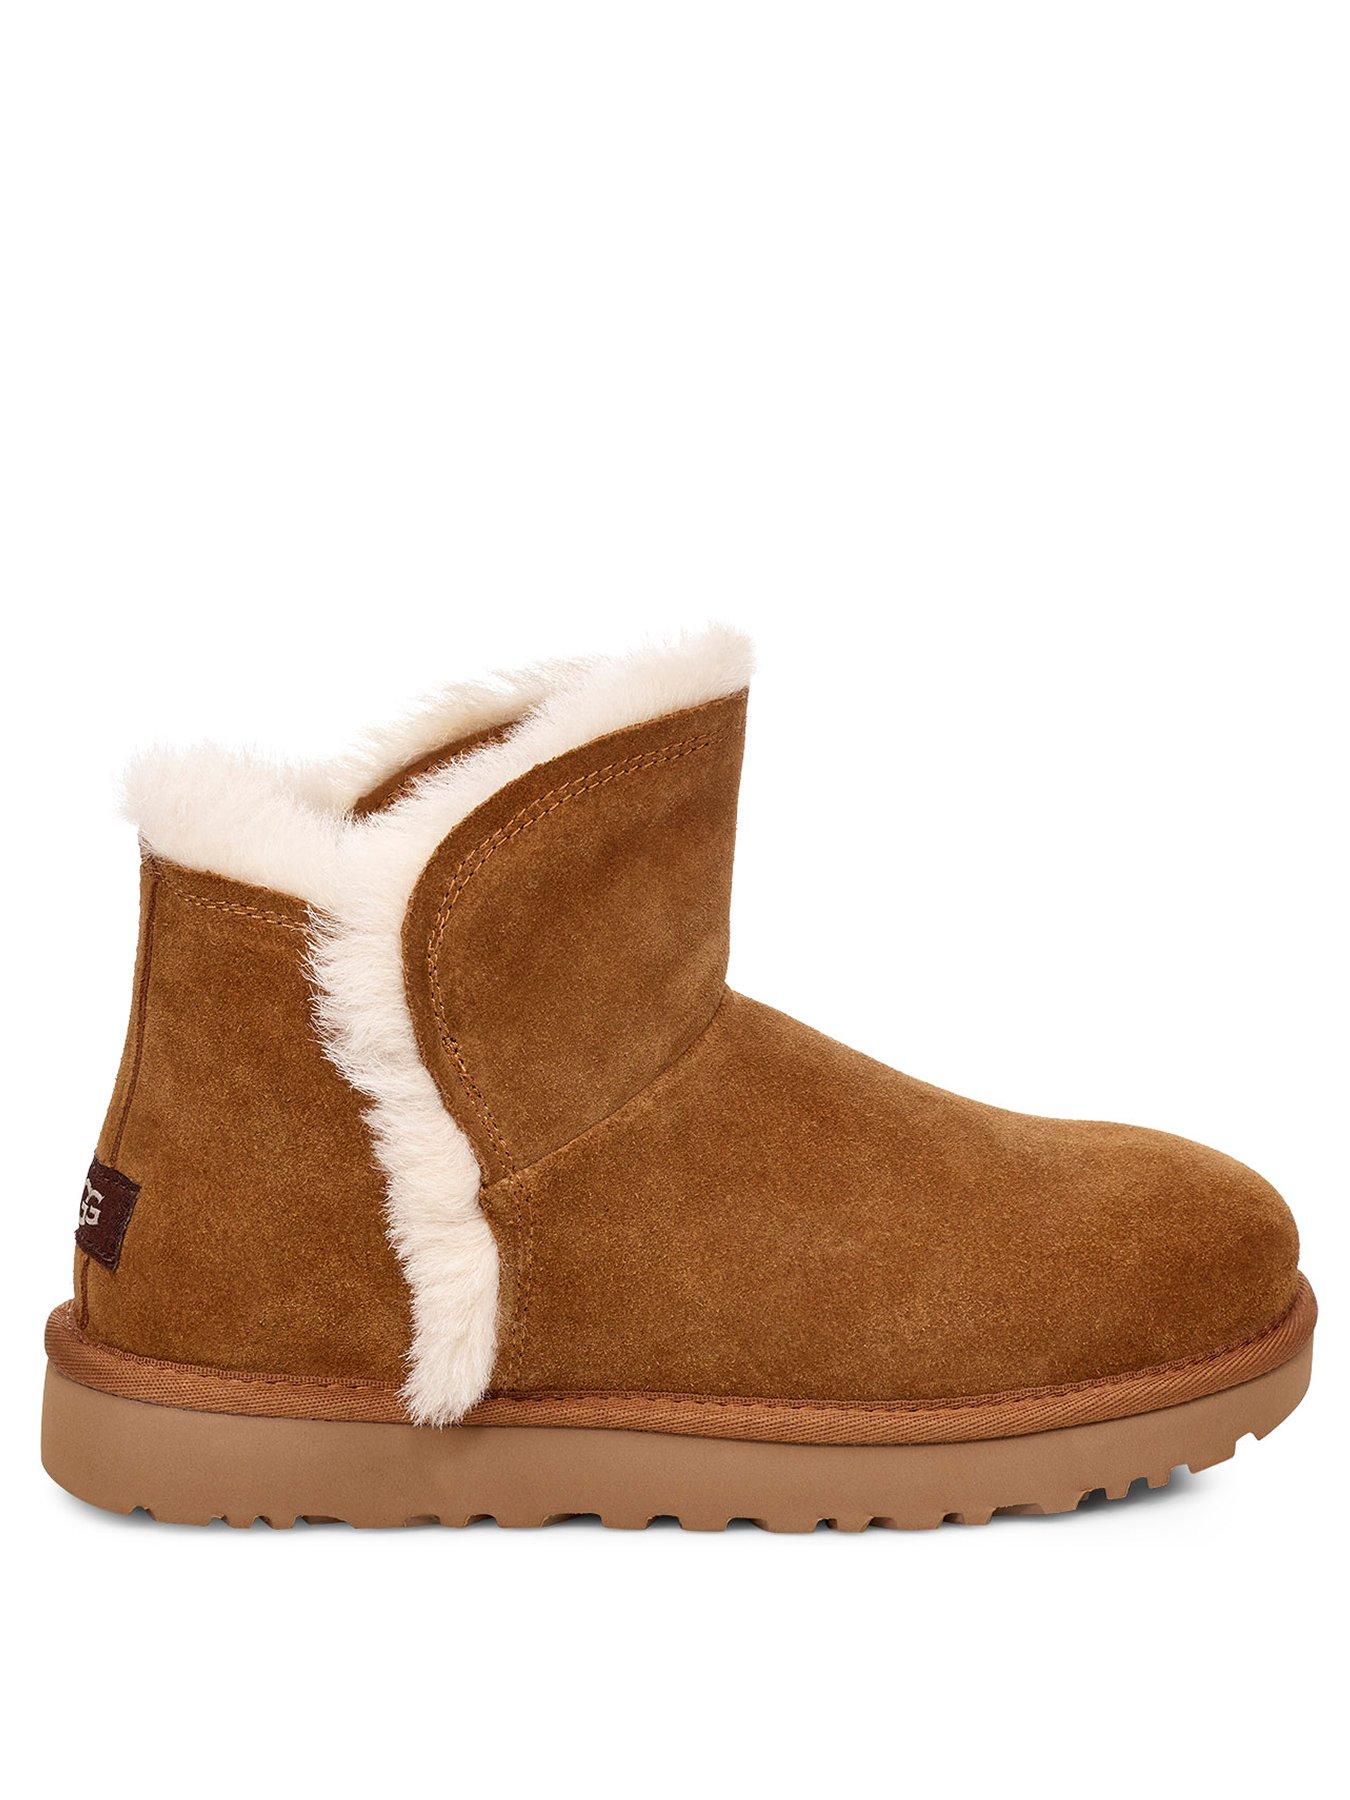 low ugg style boots